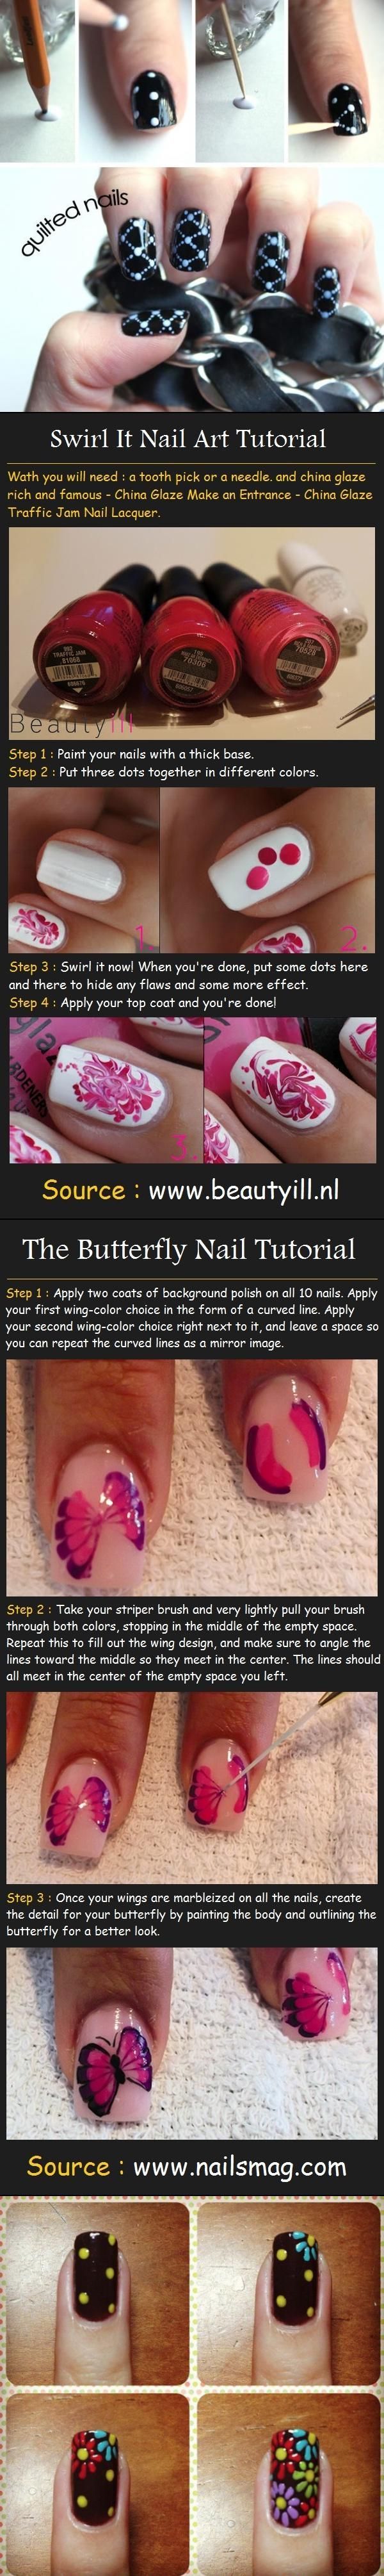 Lots of Nail Art Designs I love!!!    These are for the beginner with no special tools